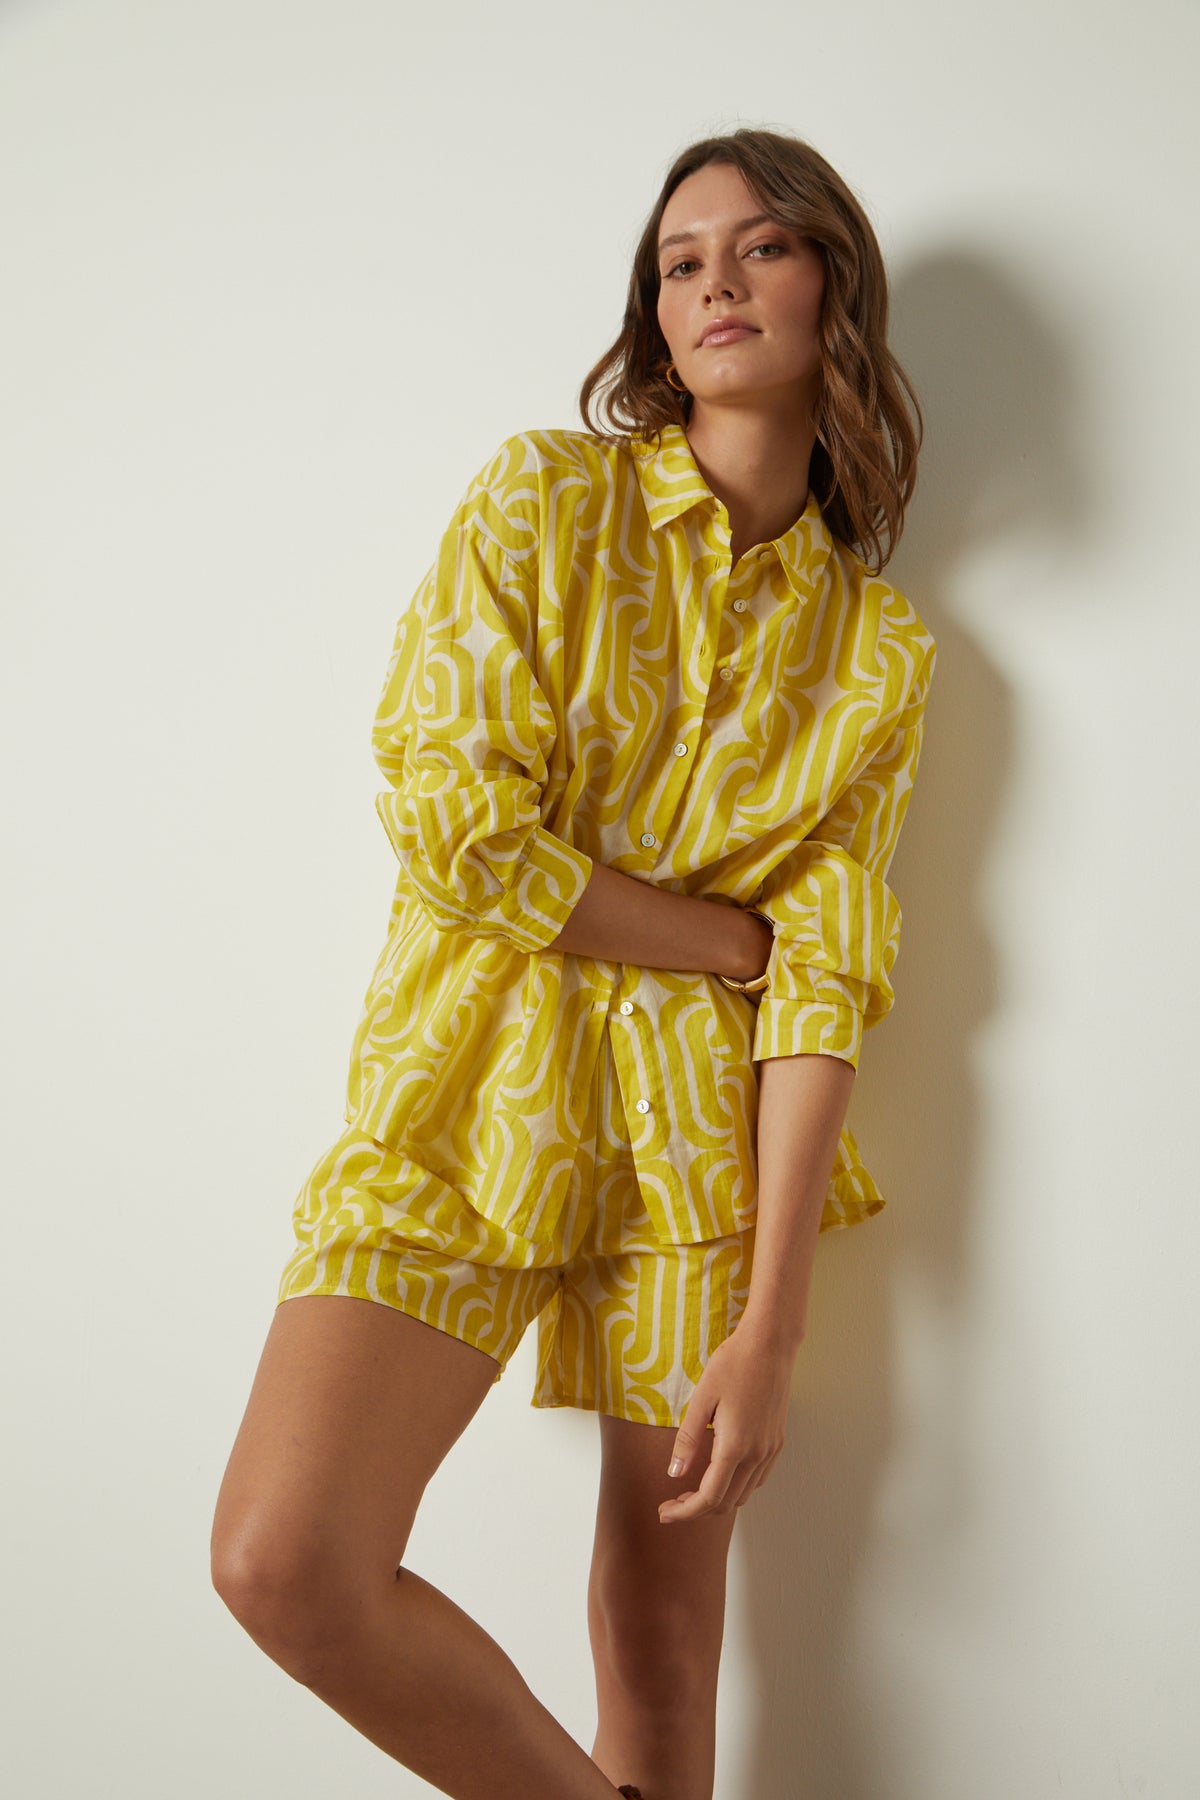   a woman in yellow Velvet by Graham & Spencer pyjamas leaning against a wall. 